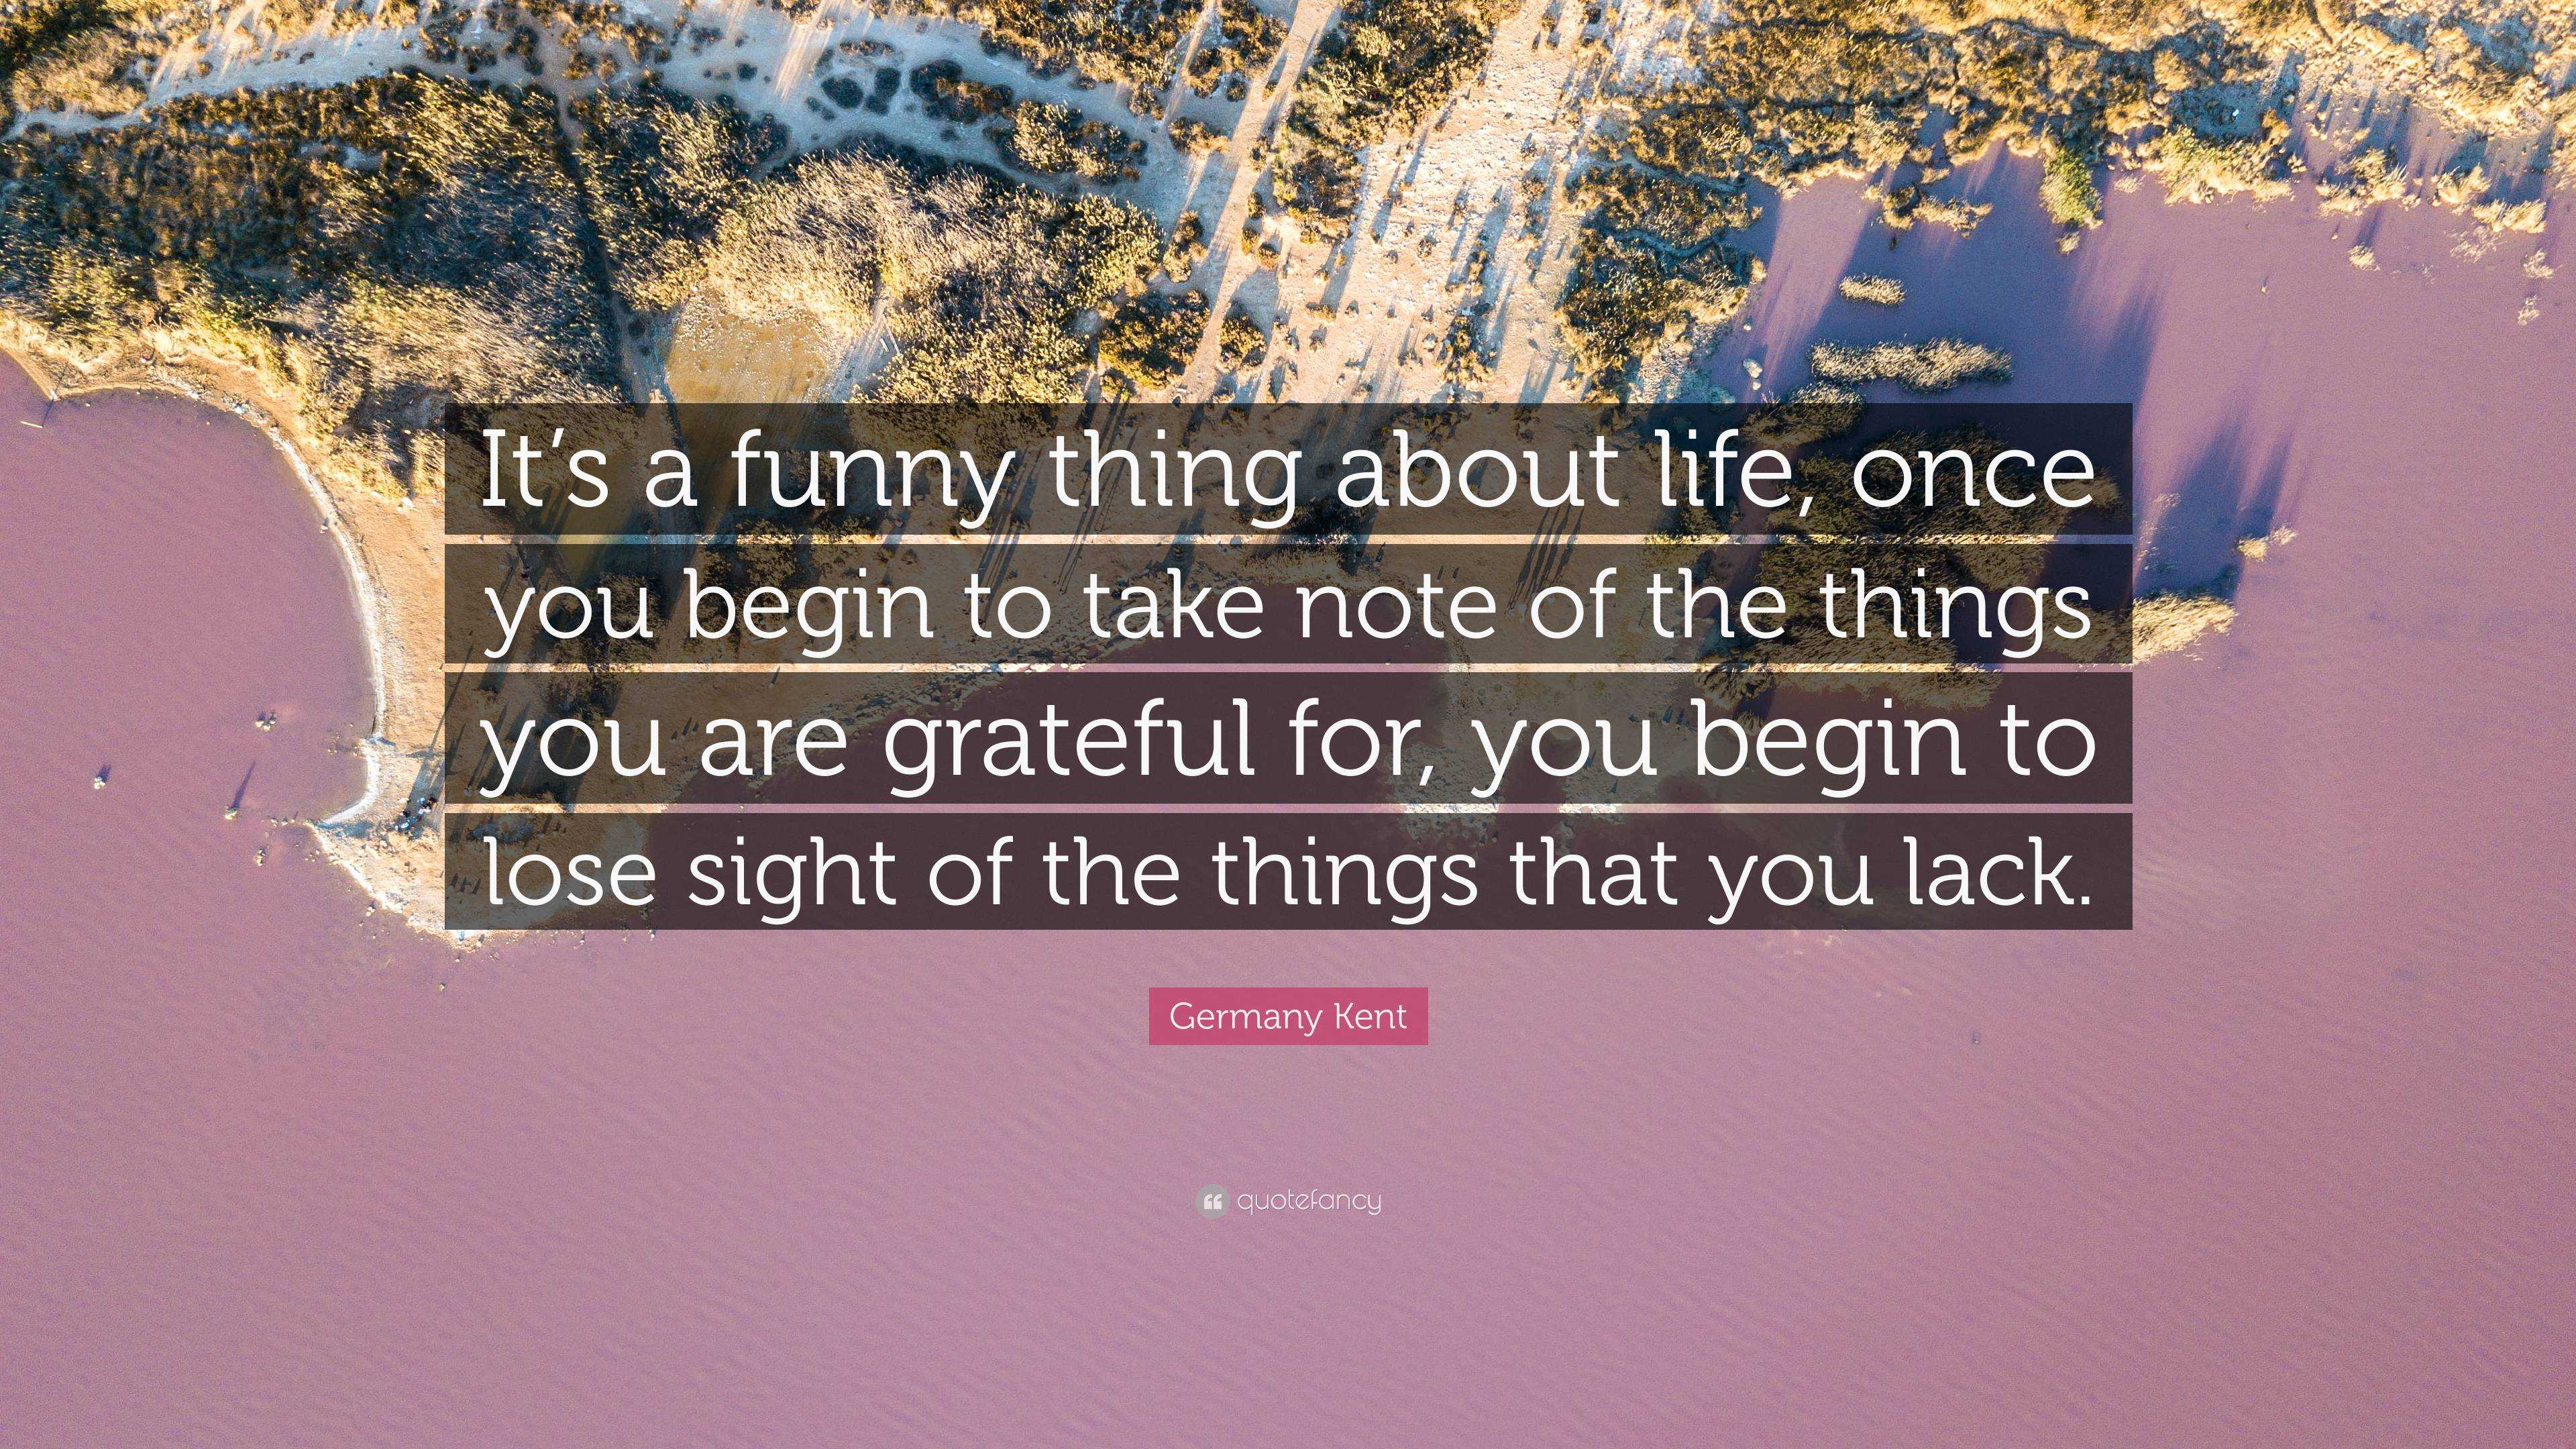 Germany Kent Quote: “It's a funny thing about life, once you begin to take  note of the things you are grateful for, you begin to lose sight o...”